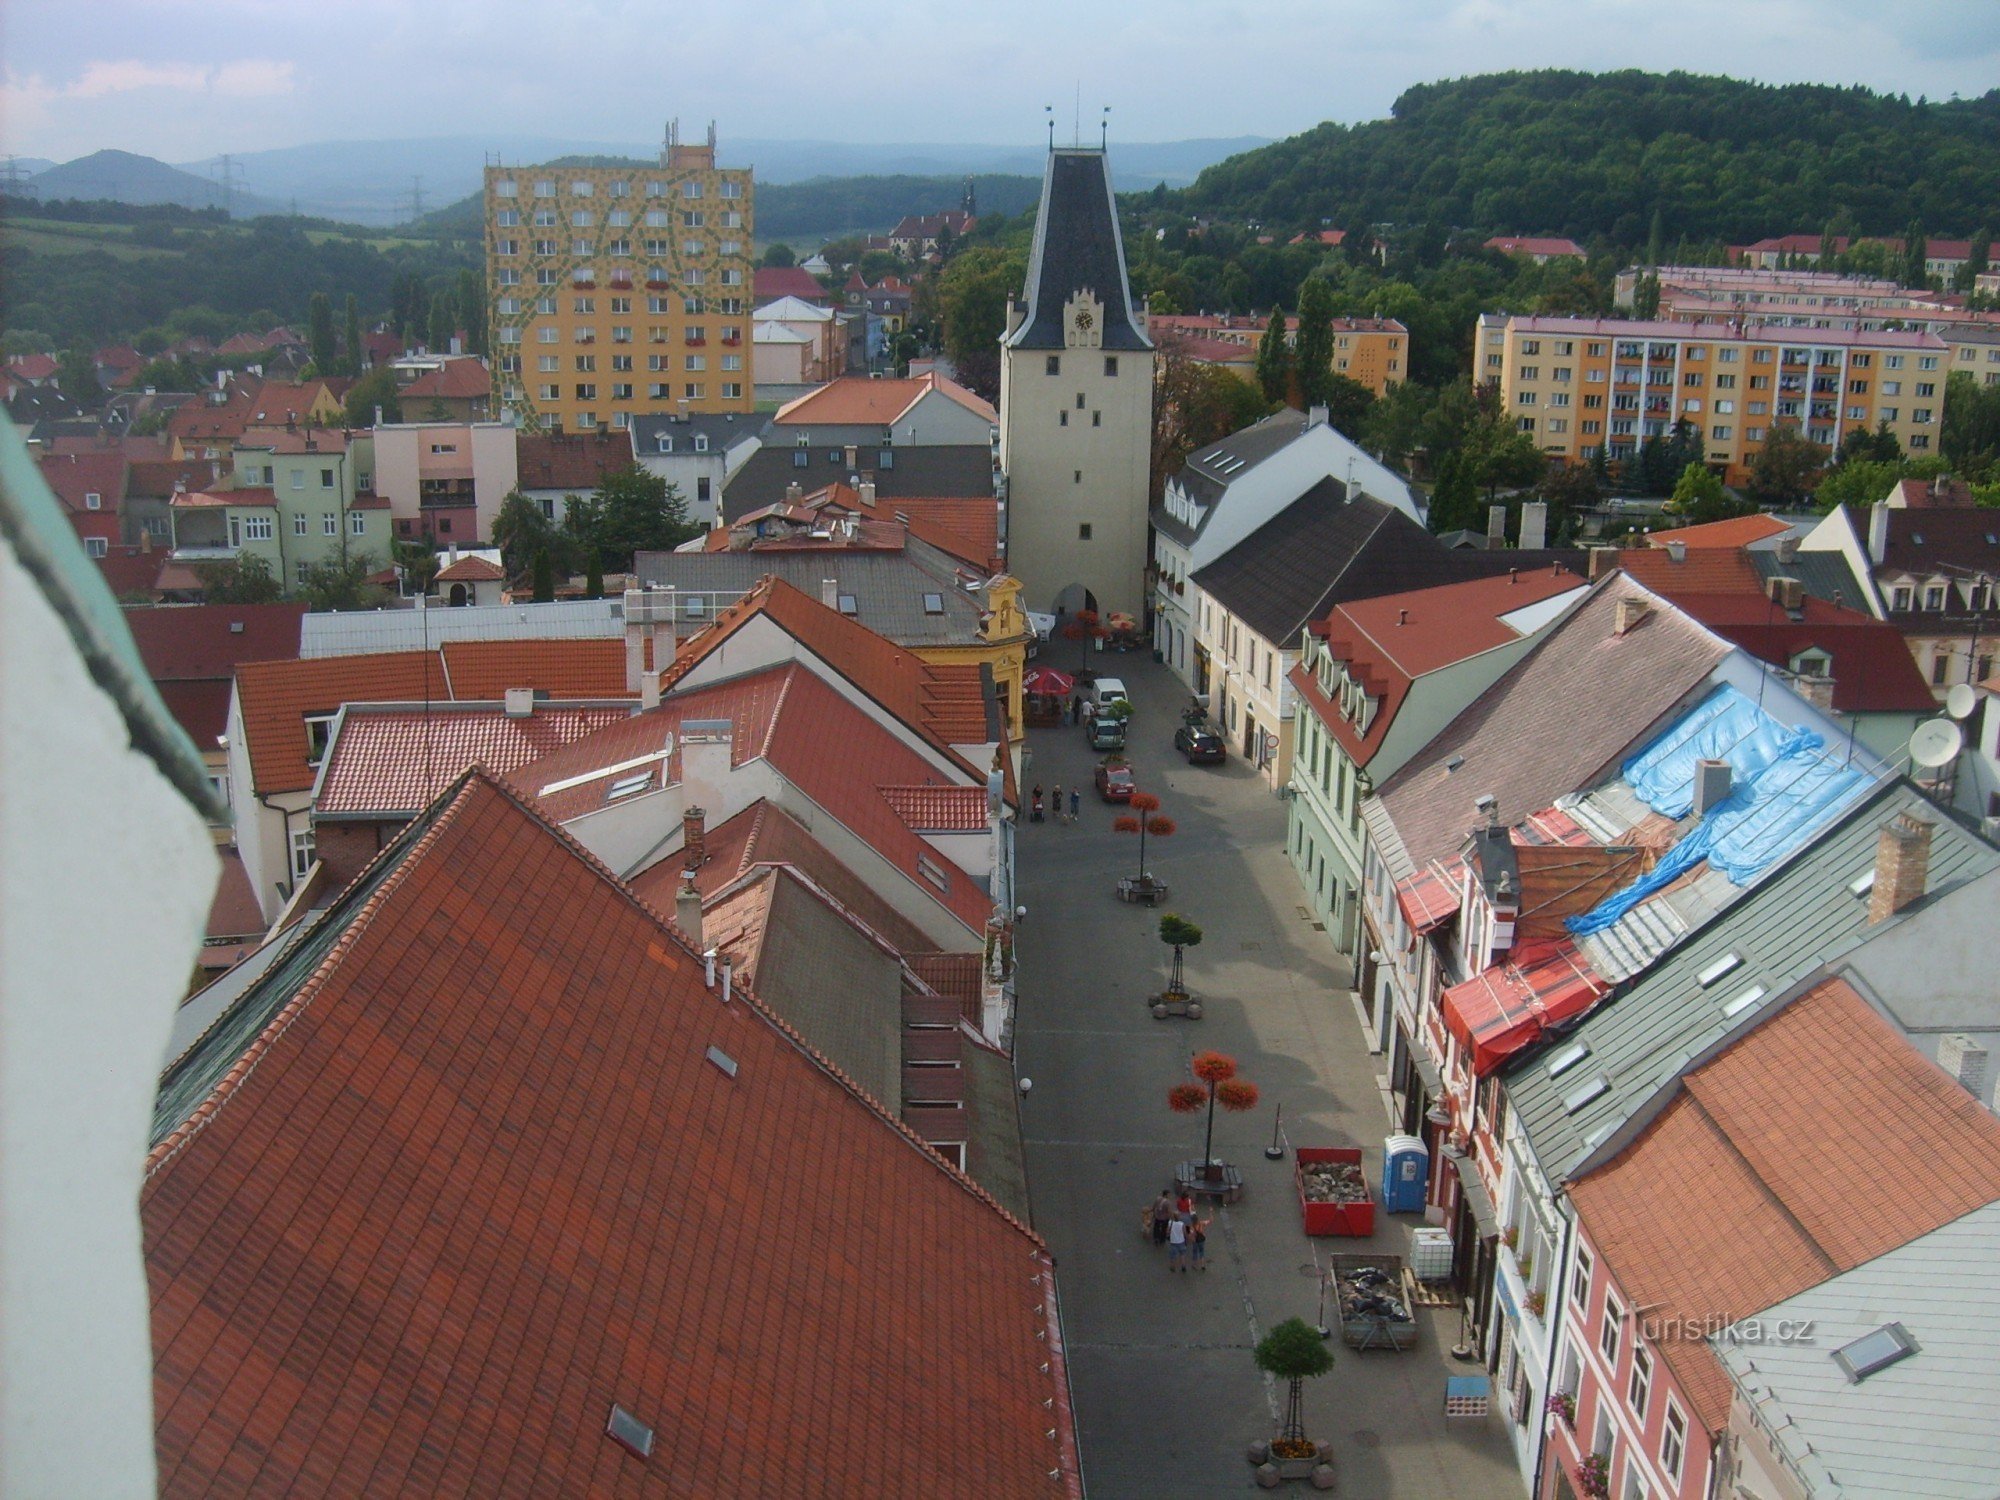 view of the Mikulov Gate from the town hall tower